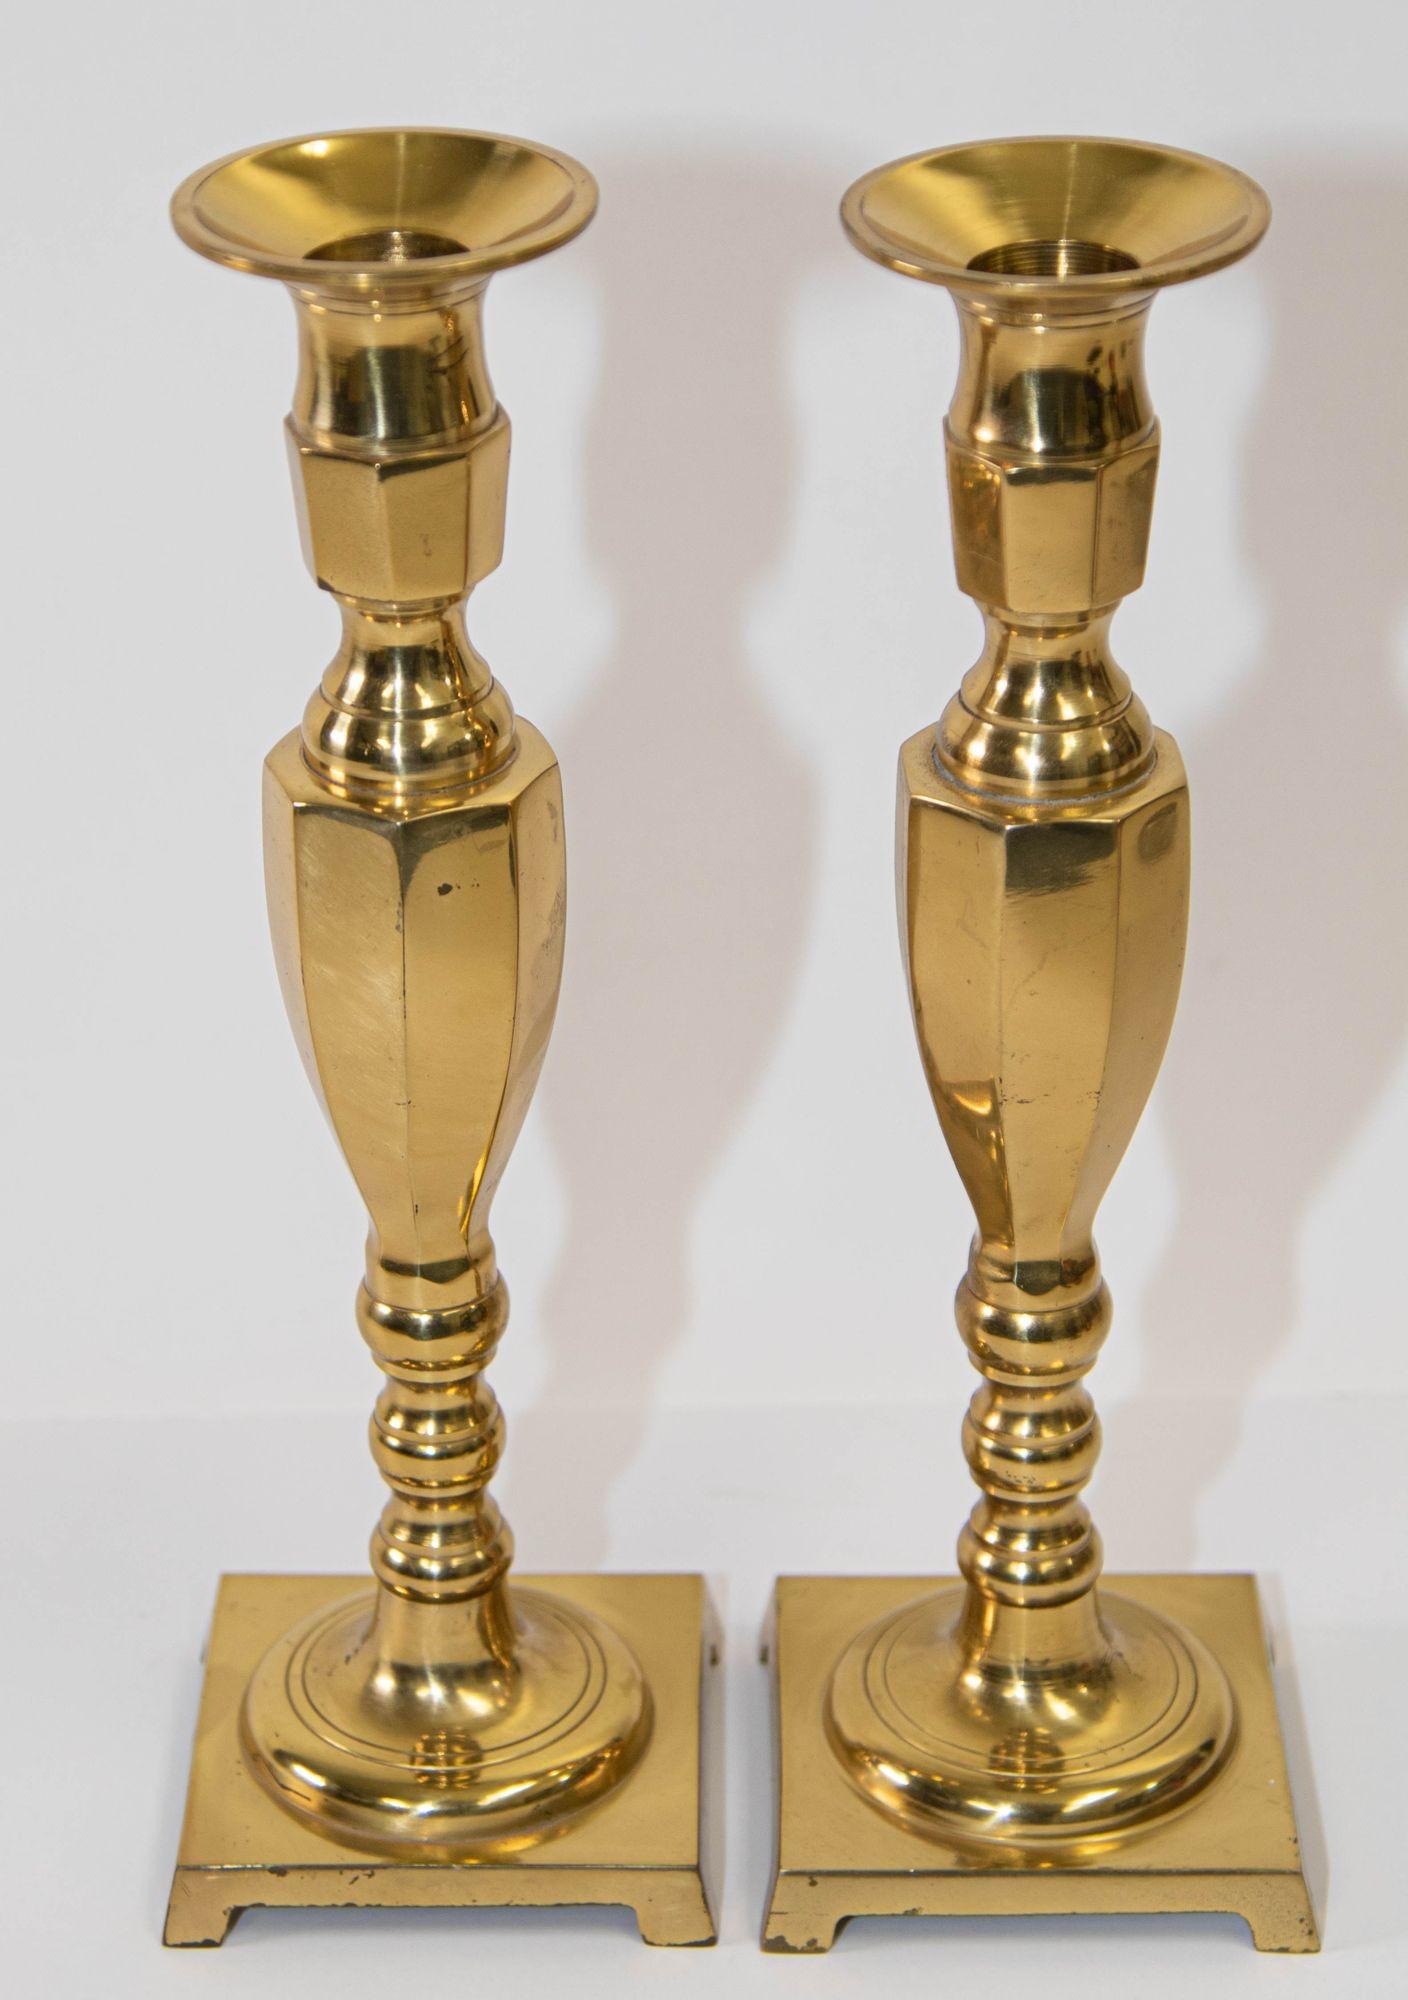 Pair of Georgian polished brass candlesticks, candle holder with square base.
Fine pair of solid polished brass English candlesticks.
Victorian candlesticks such as these were heirlooms, passed down from mother to daughter or